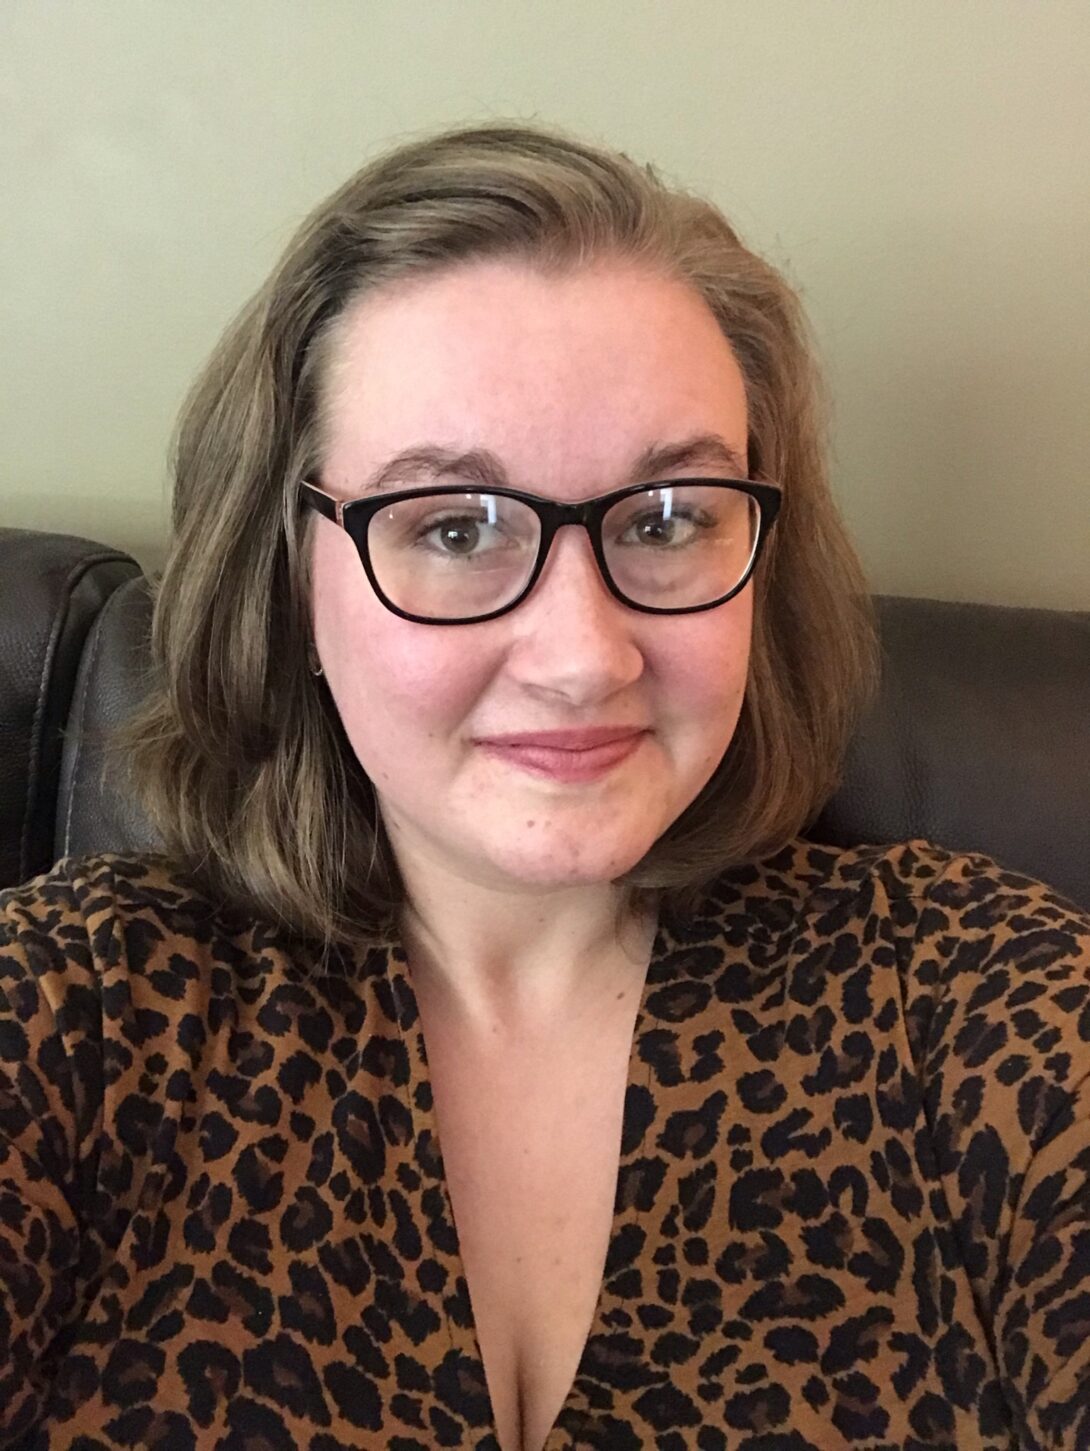 In this selfie, a person with glasses in a dark cheetah-print shirt sits on a couch in front of a wall.